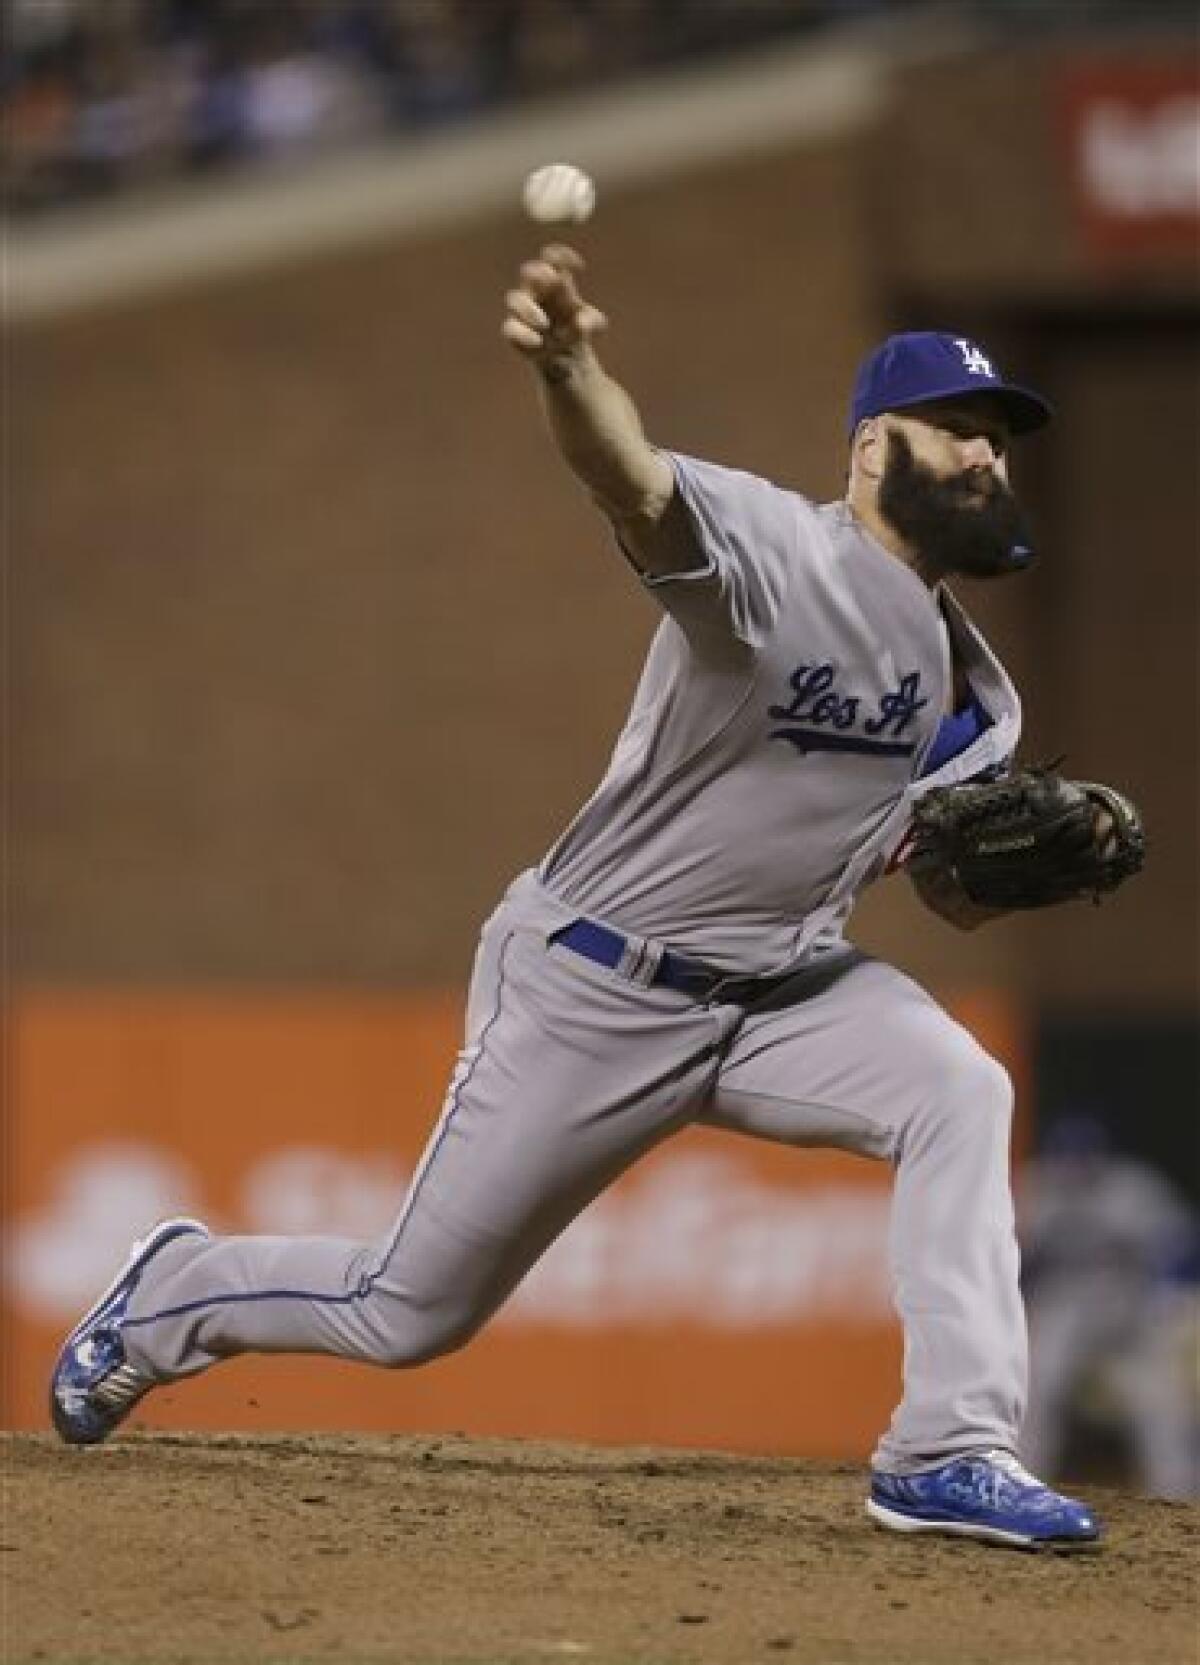 Dodgers reliever Paco Rodriguez looks for happier ending this